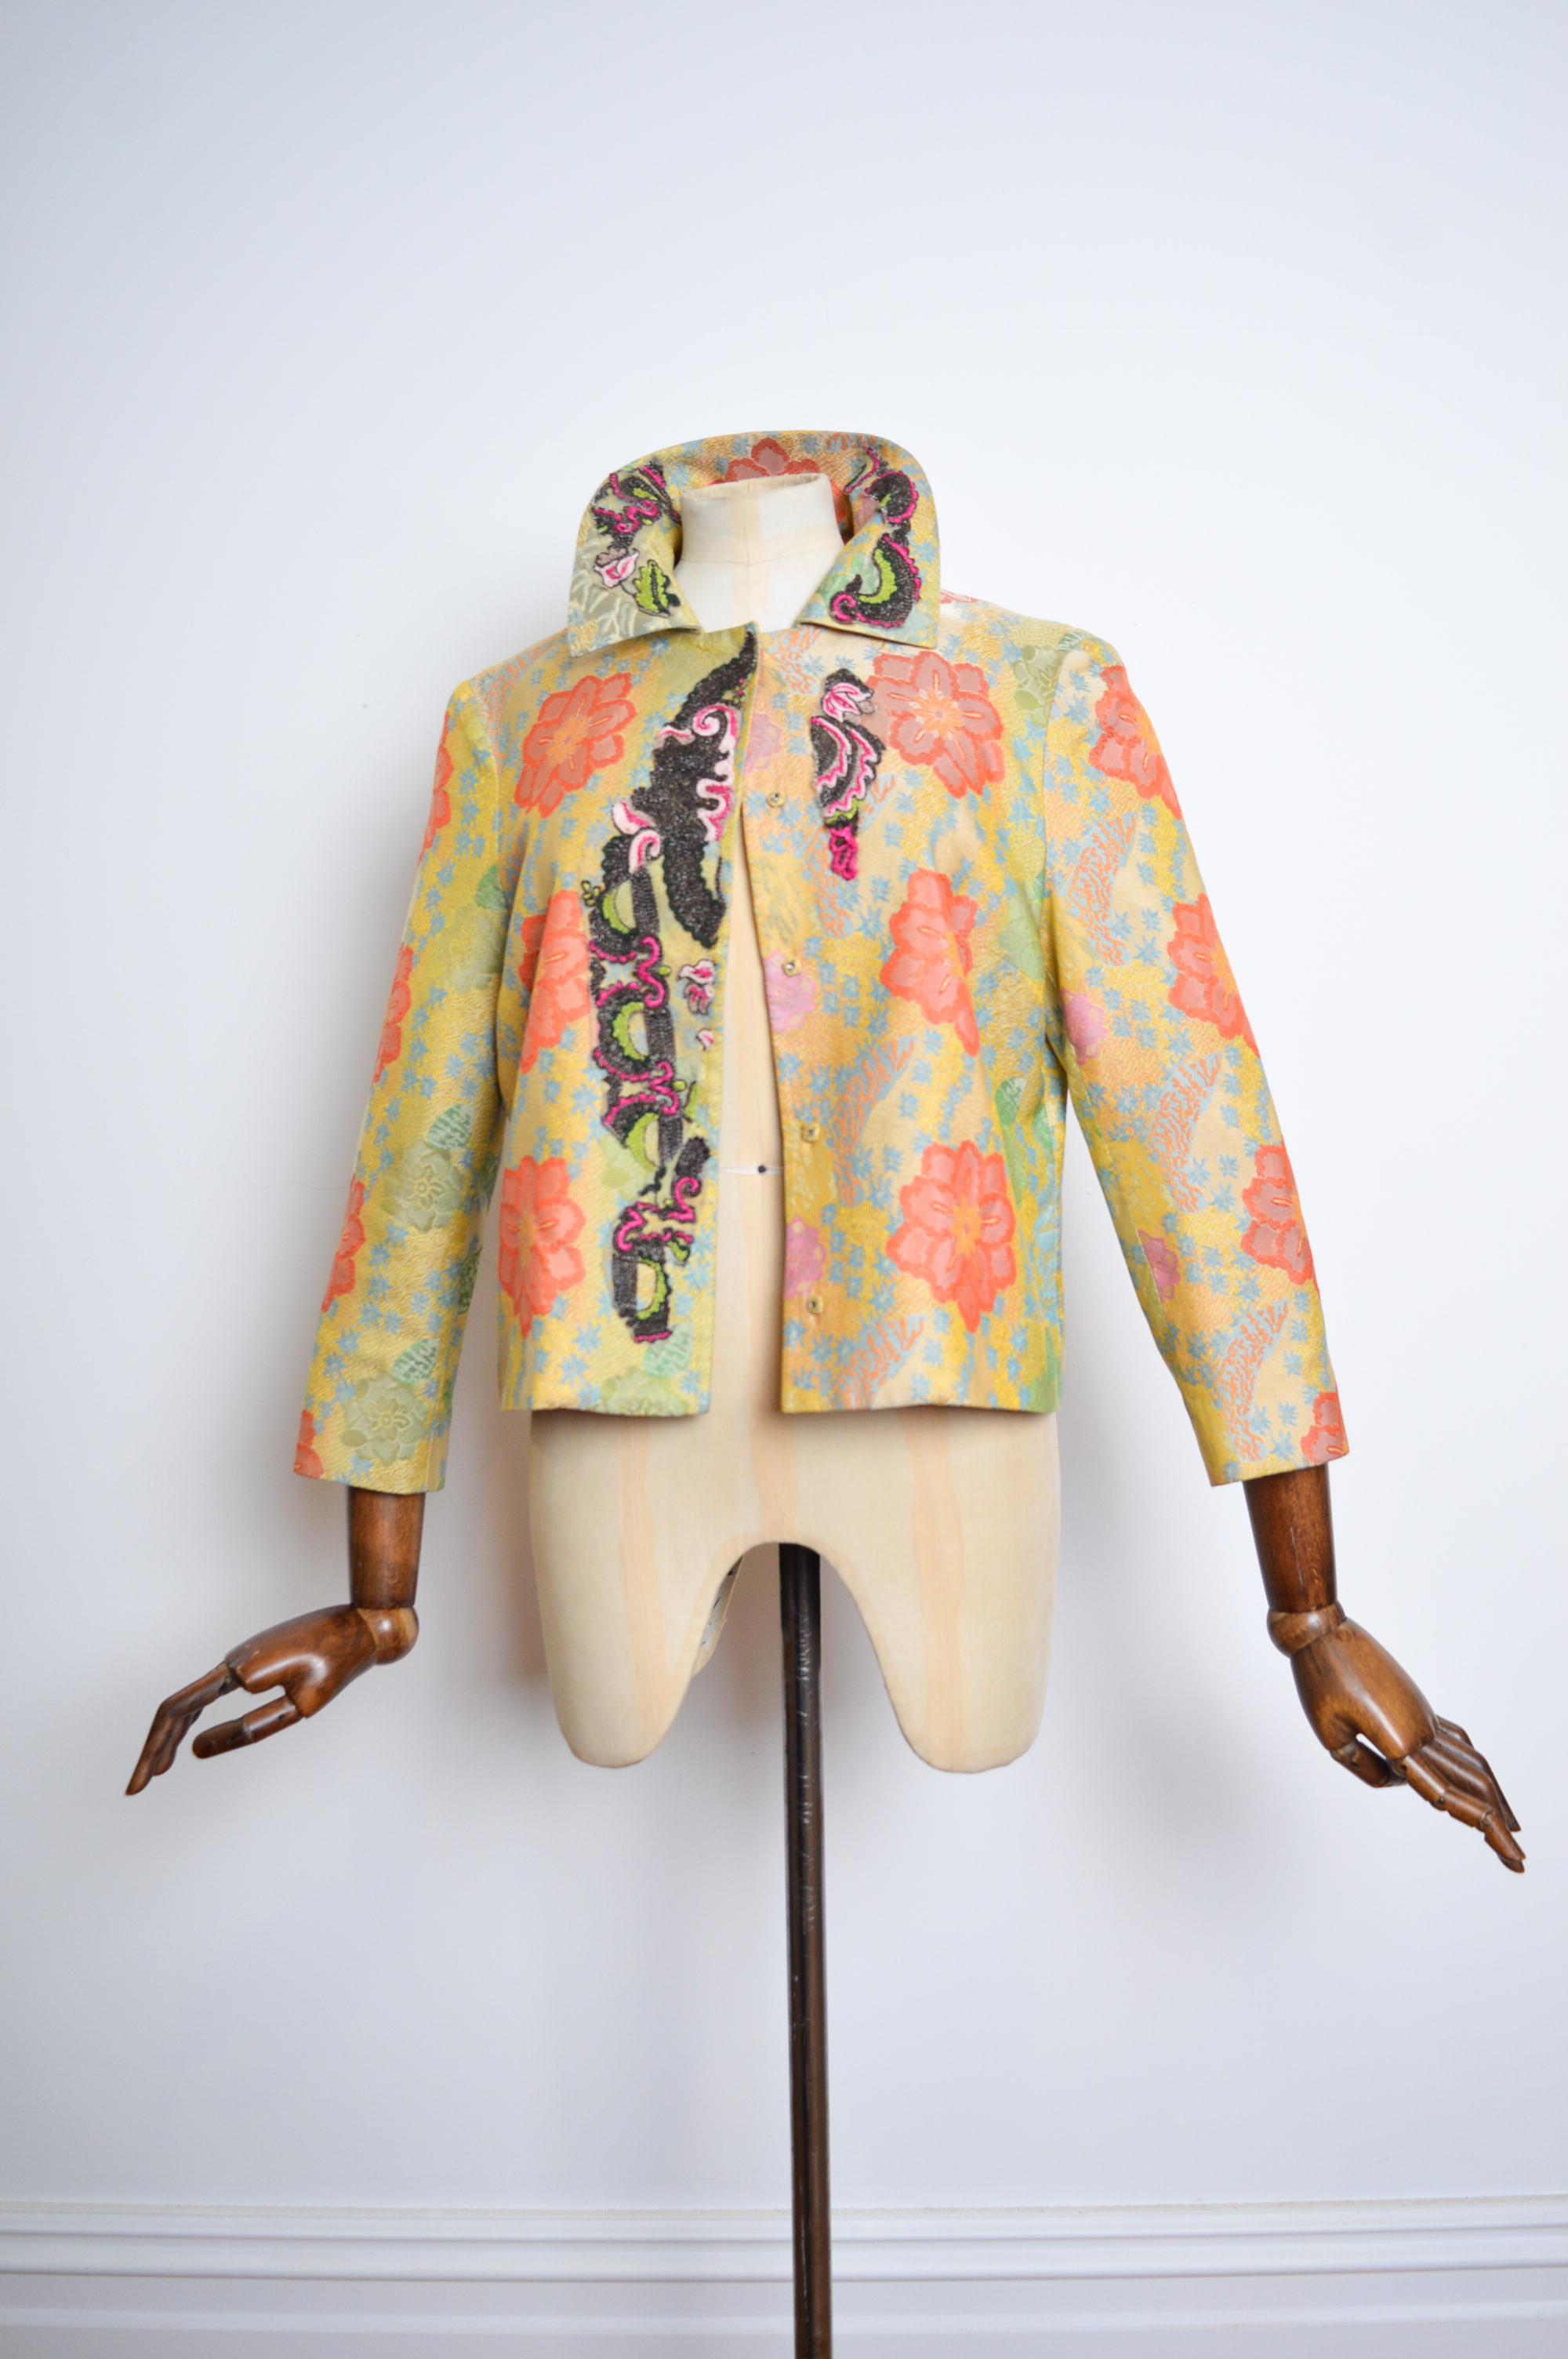 Superb Vintage Jacquard Cocoon shaped Bouclé Jacket by Christian Lacroix, in a beautiful intricately crafted yellow floral jacquard cloth with lace detailed appliqués, featuring a simple long sleeve, button down design. 

MADE IN FRANCE.

Pit to pit